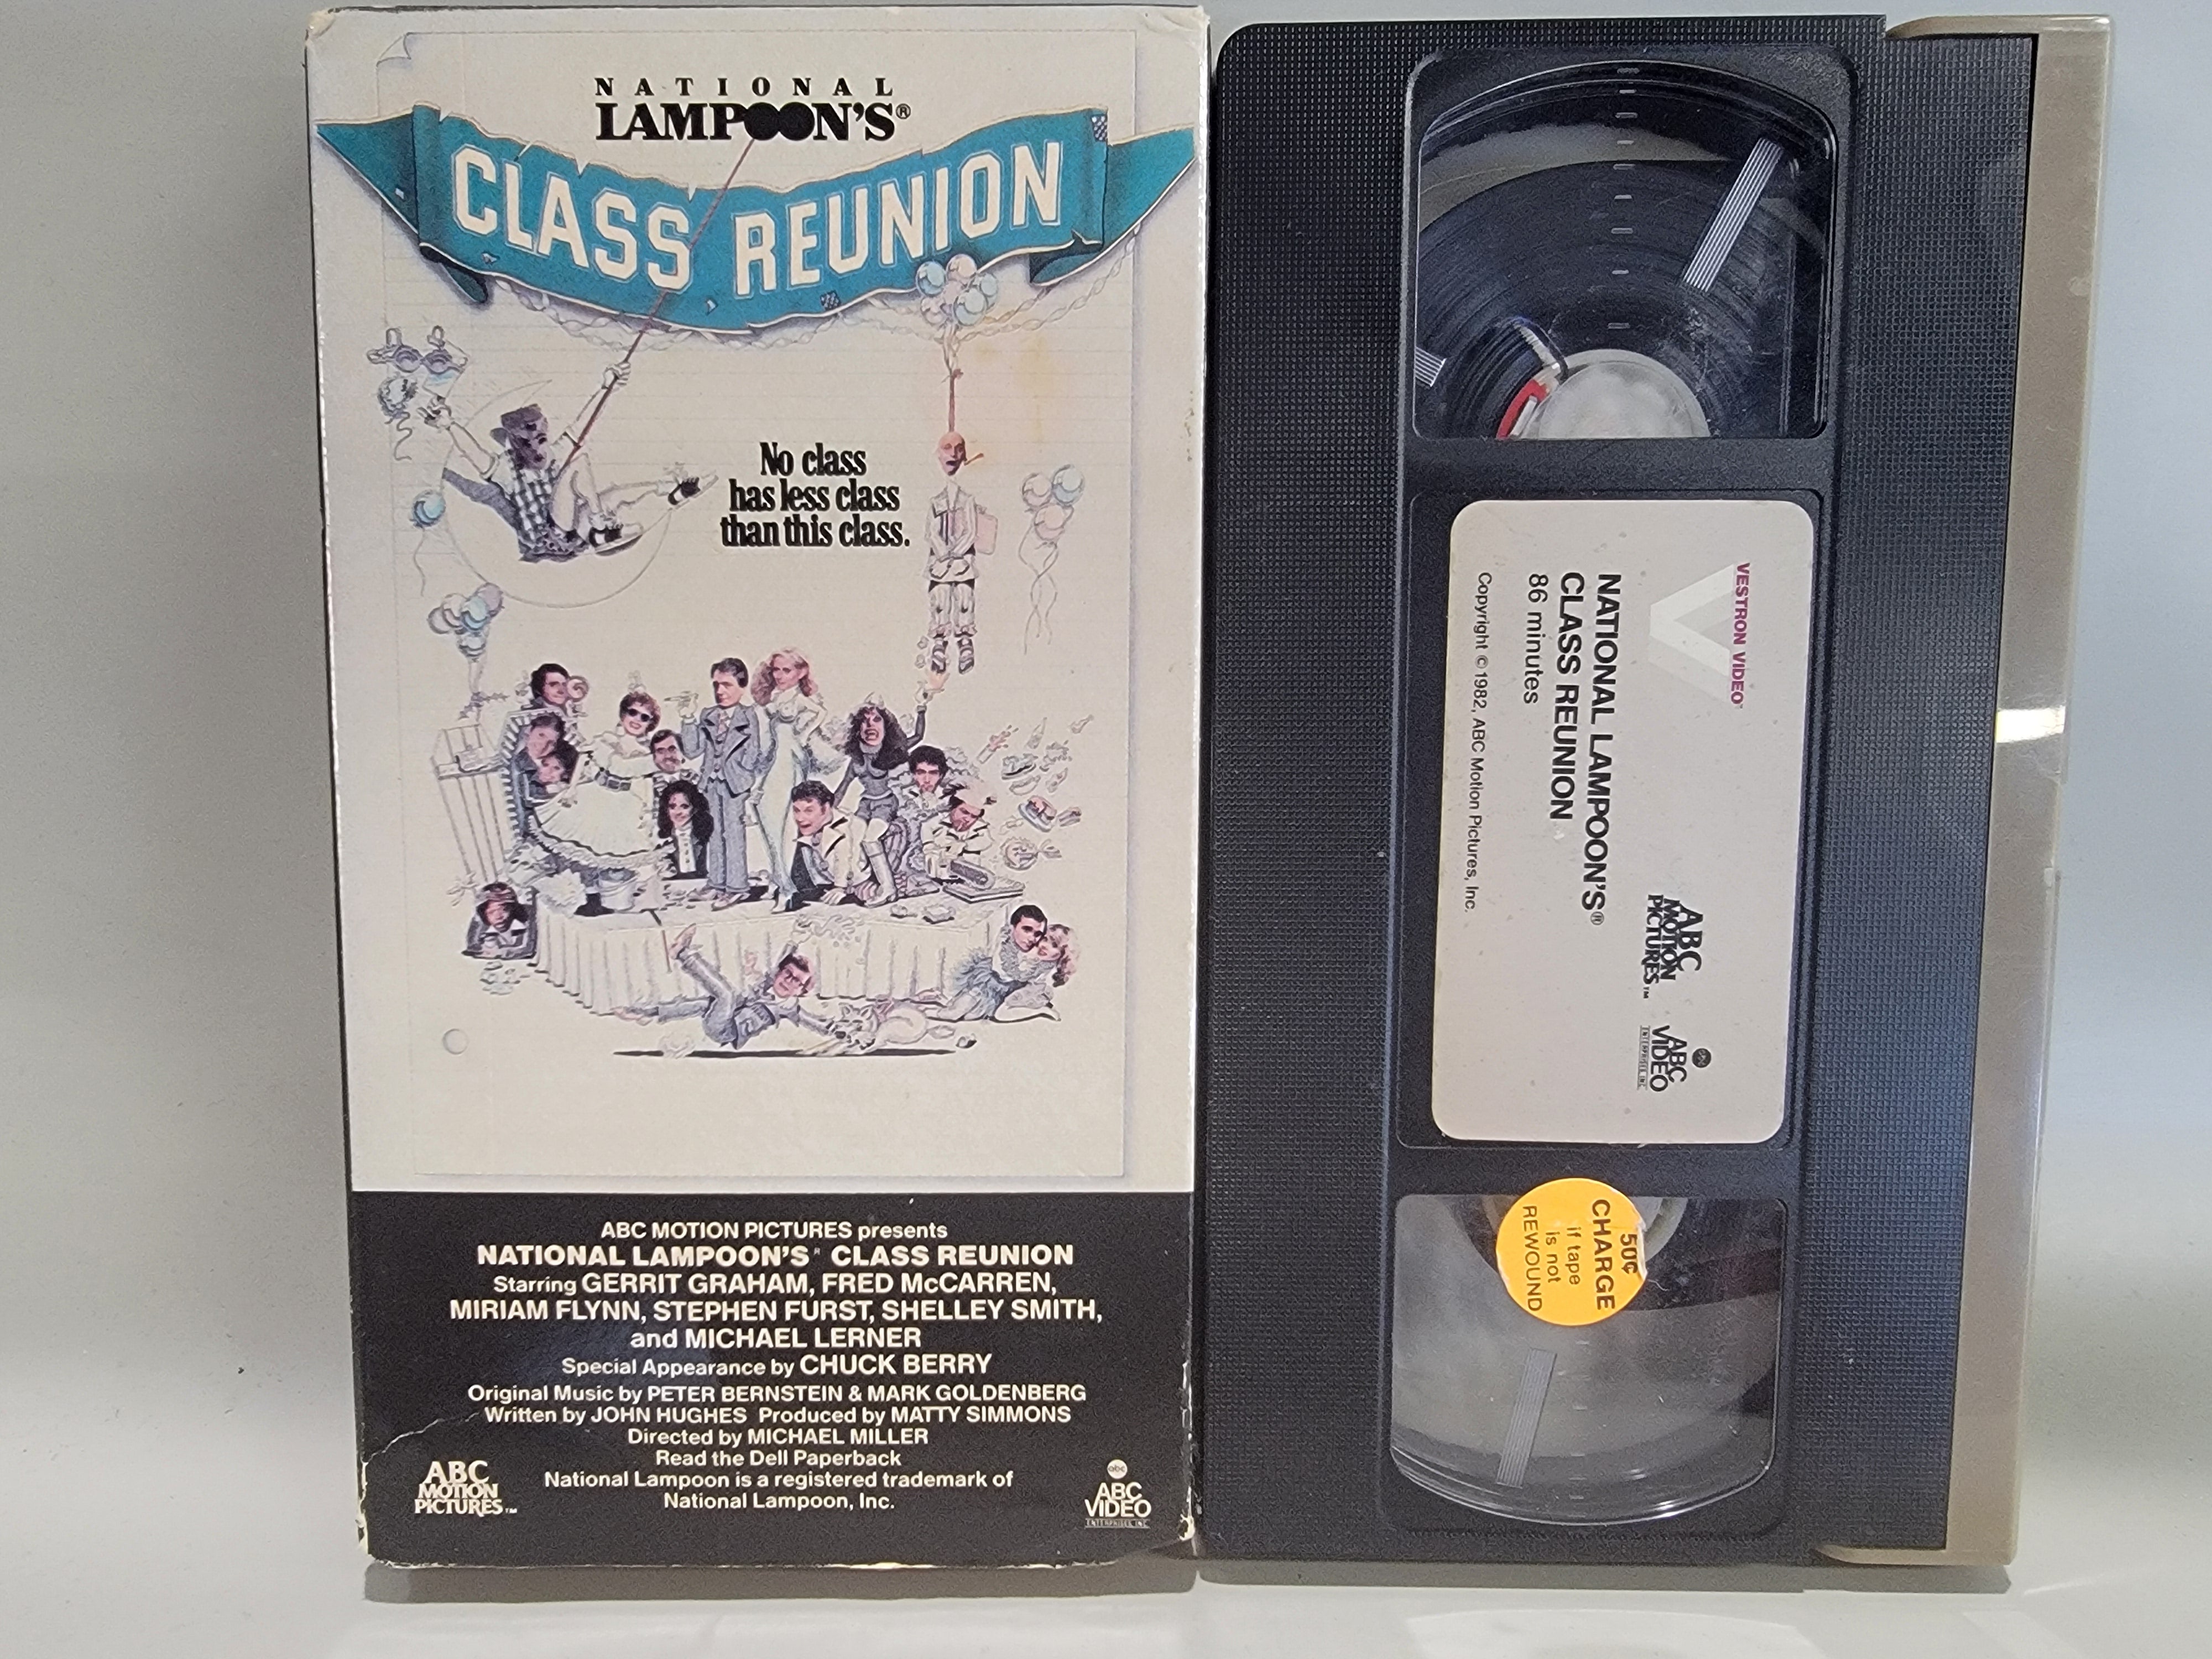 NATIONAL LAMPOON'S CLASS REUNION VHS [USED]